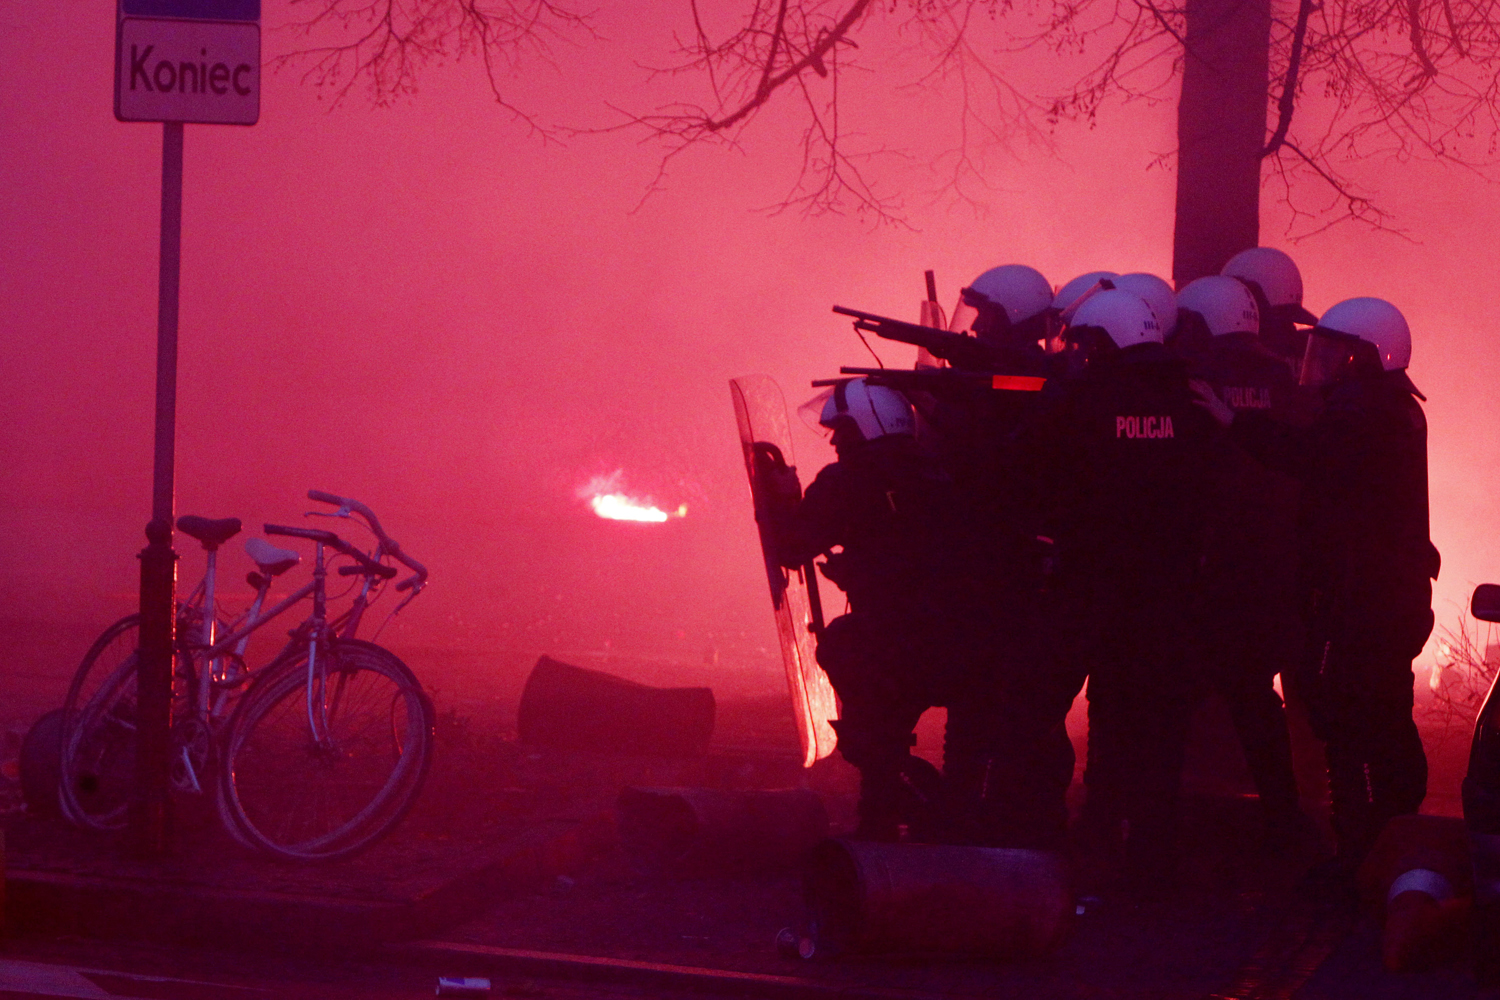 Image: Nov. 11, 2012. Police secure the area during clashes at the March of Independence marking Poland's Independence Day, in Warsaw.